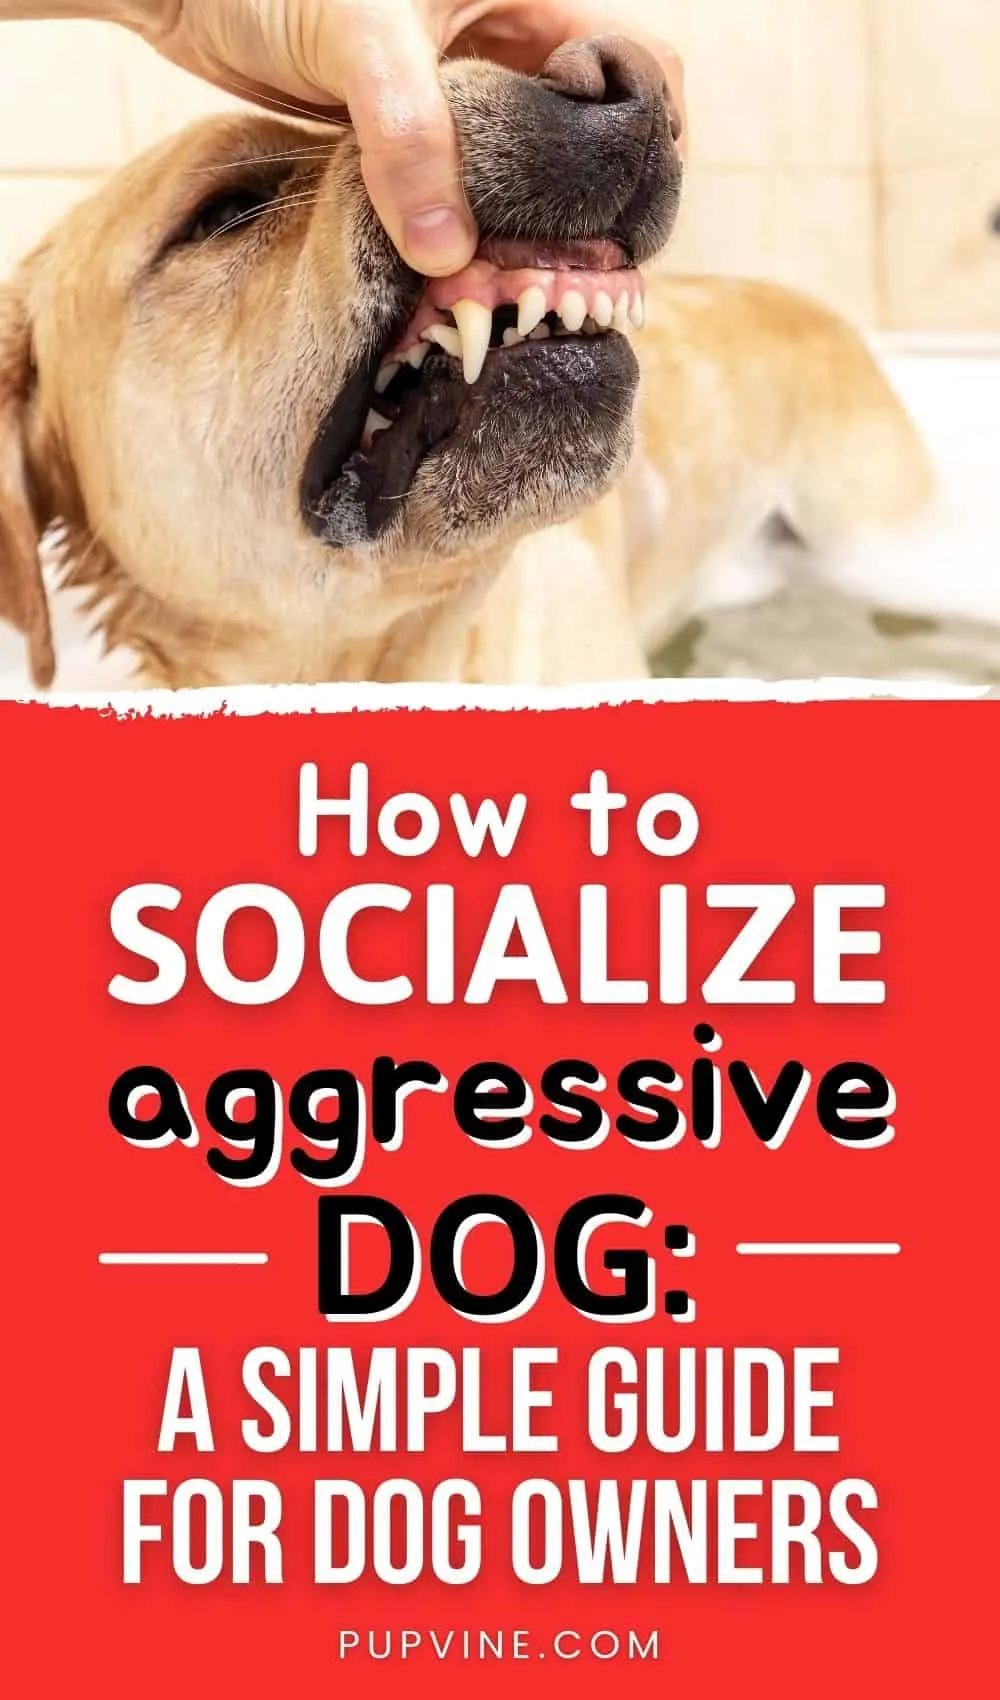 How To Socialize An Aggressive Dog: A Simple Guide For Dog Owners